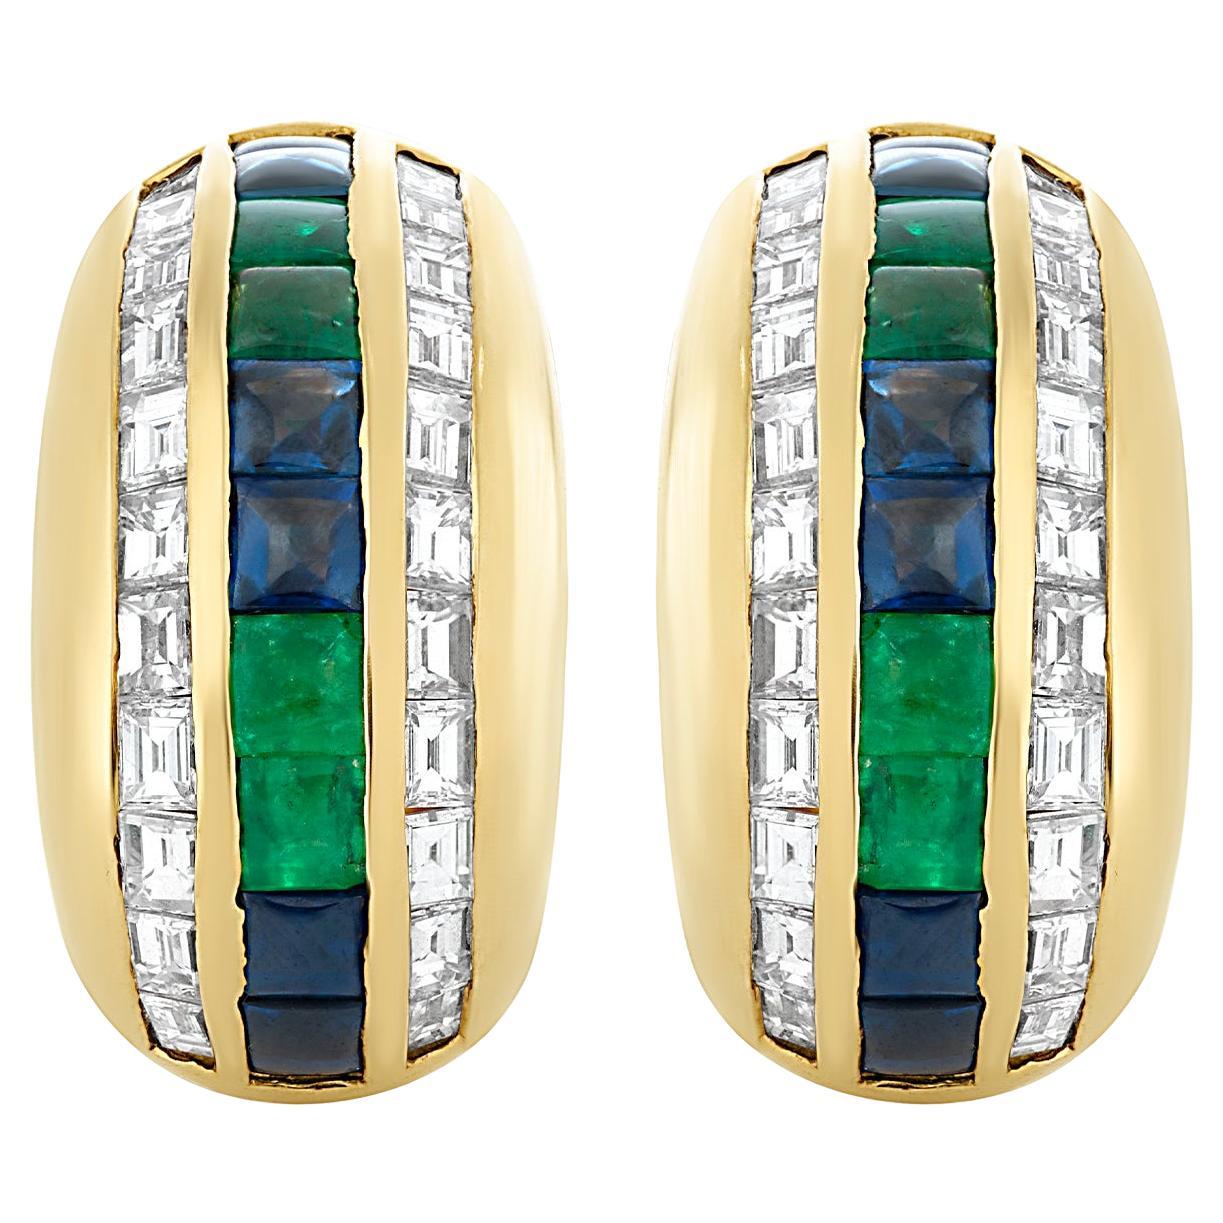 Bvlgari 18k Yellow Gold Diamond and Alternating Emerald and Sapphire Earrings For Sale